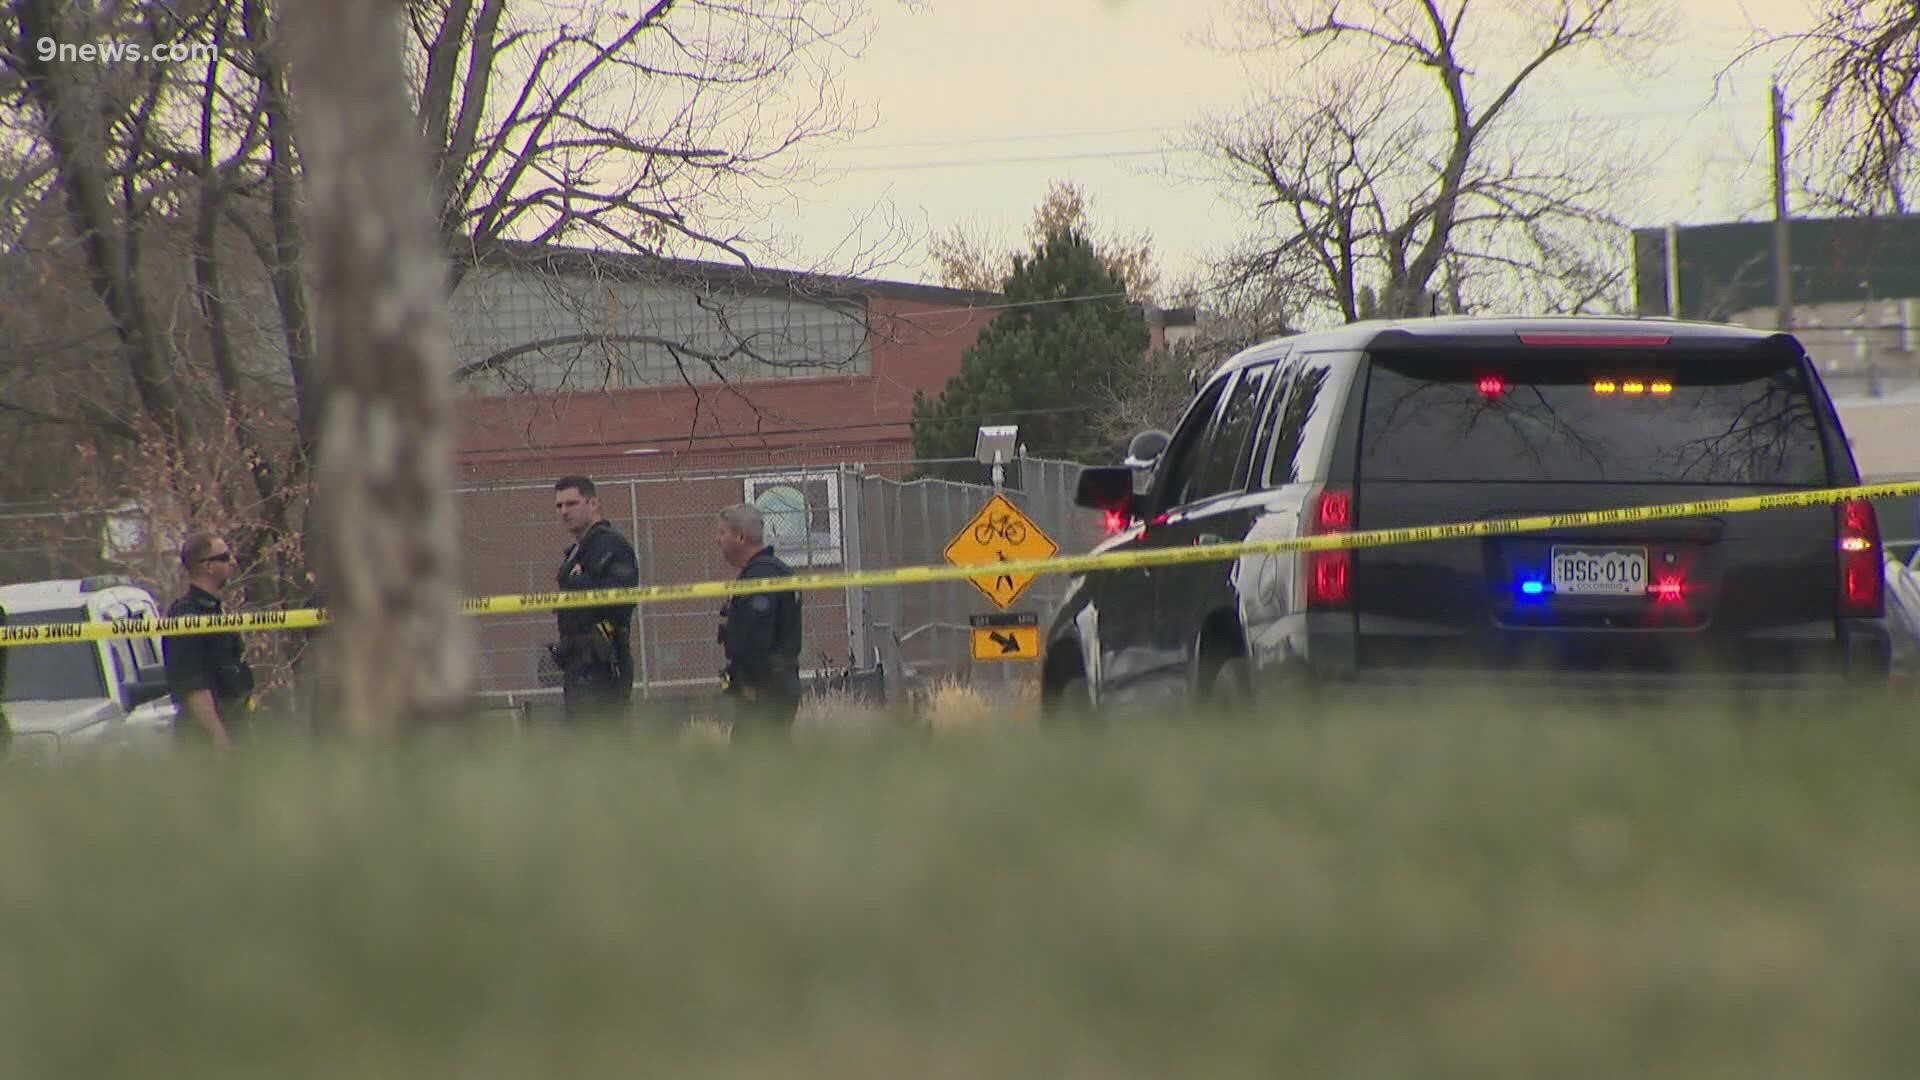 Three 15-year-old suspects were also arrested in connection to the November shooting that left six students injured, according to Aurora Police.